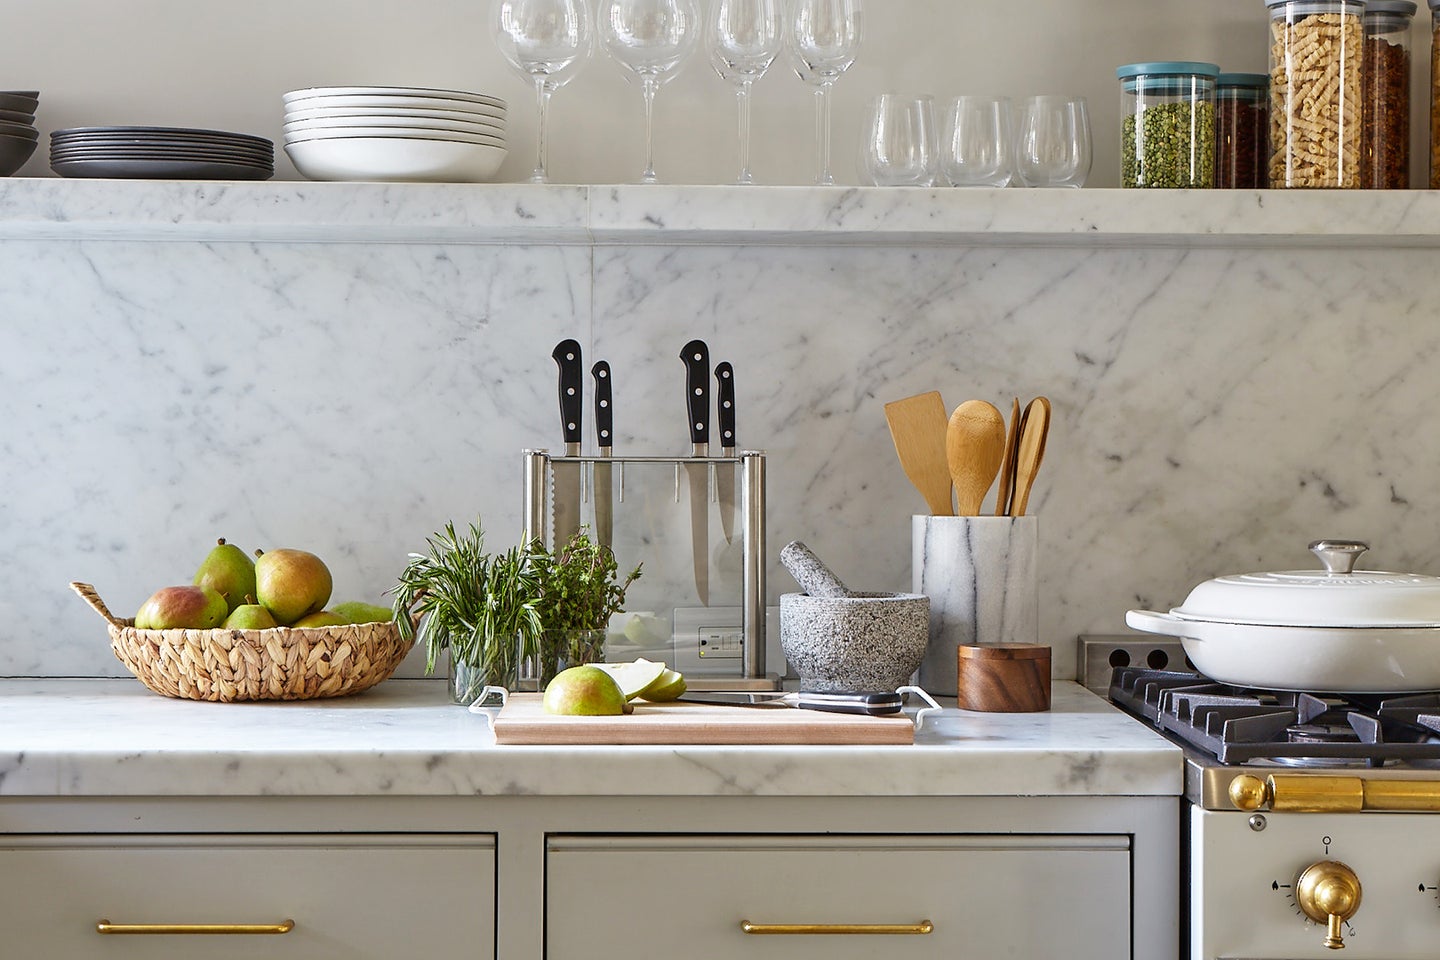 Take a Stab at Any One of Our Favorite Kitchen Knife Storage Ideas